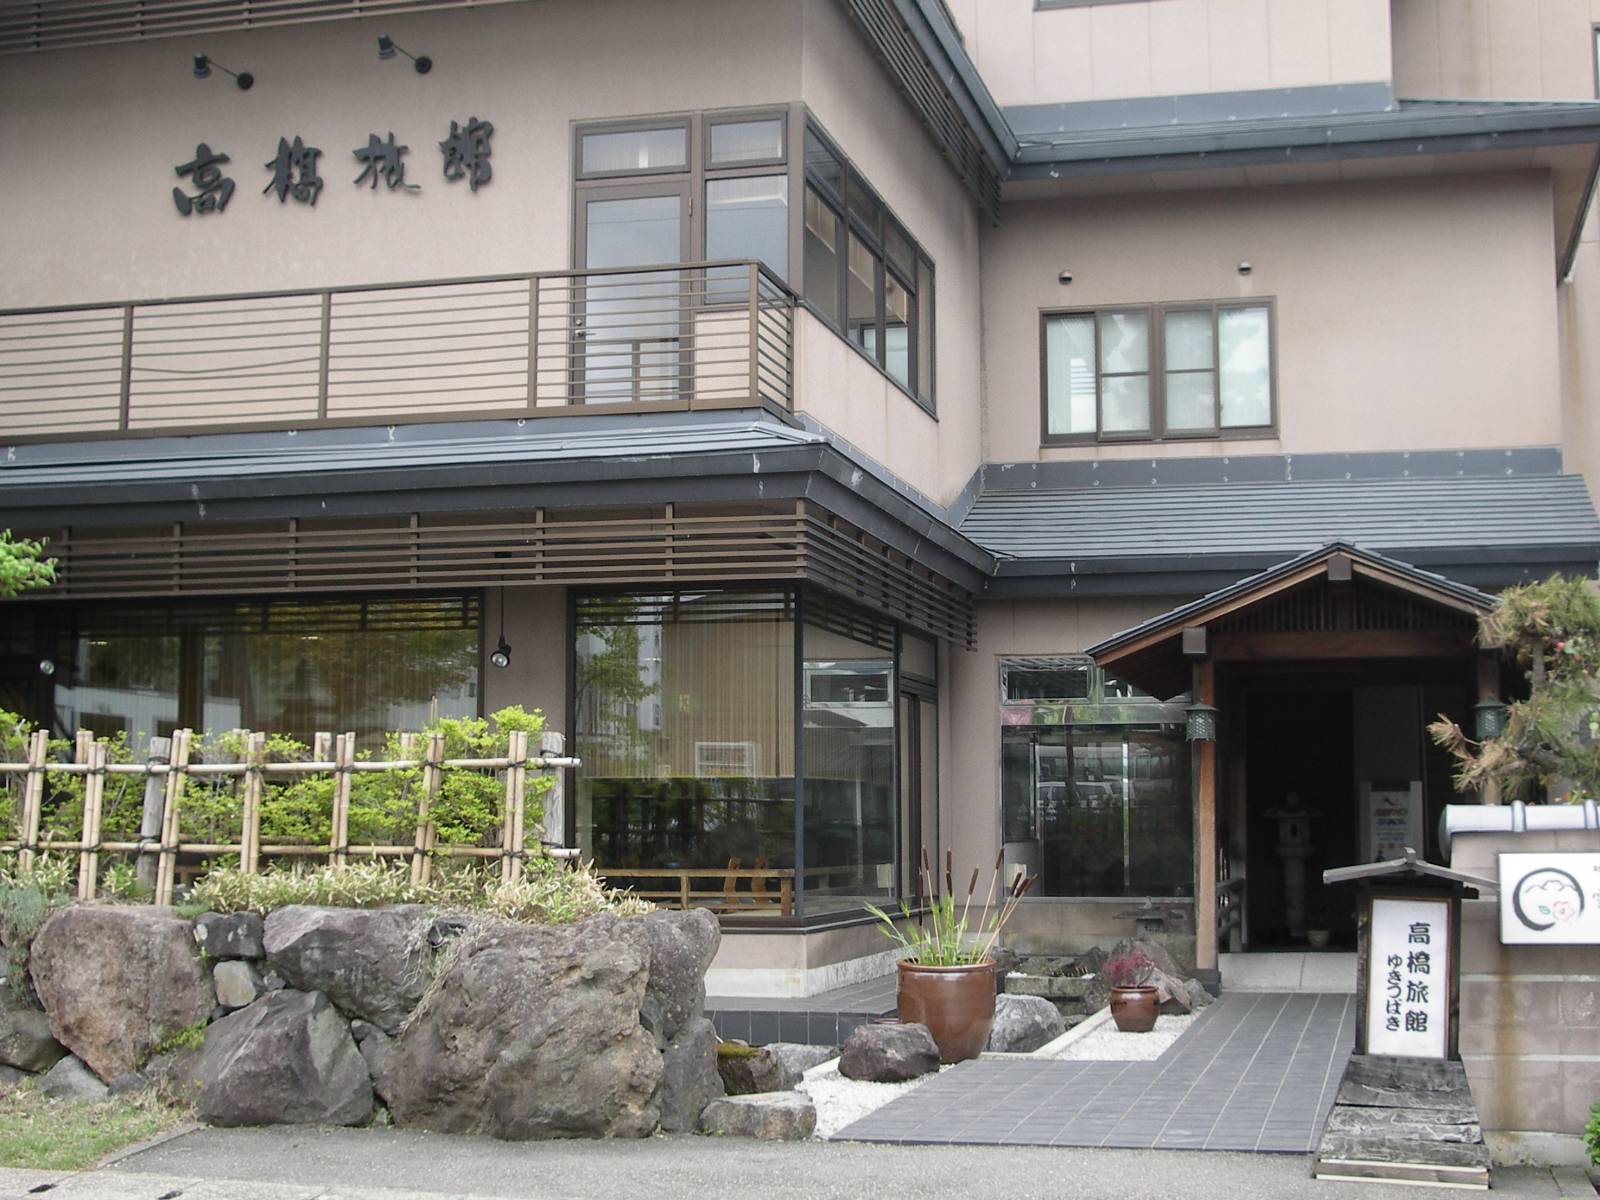 Outside view of the hotel.